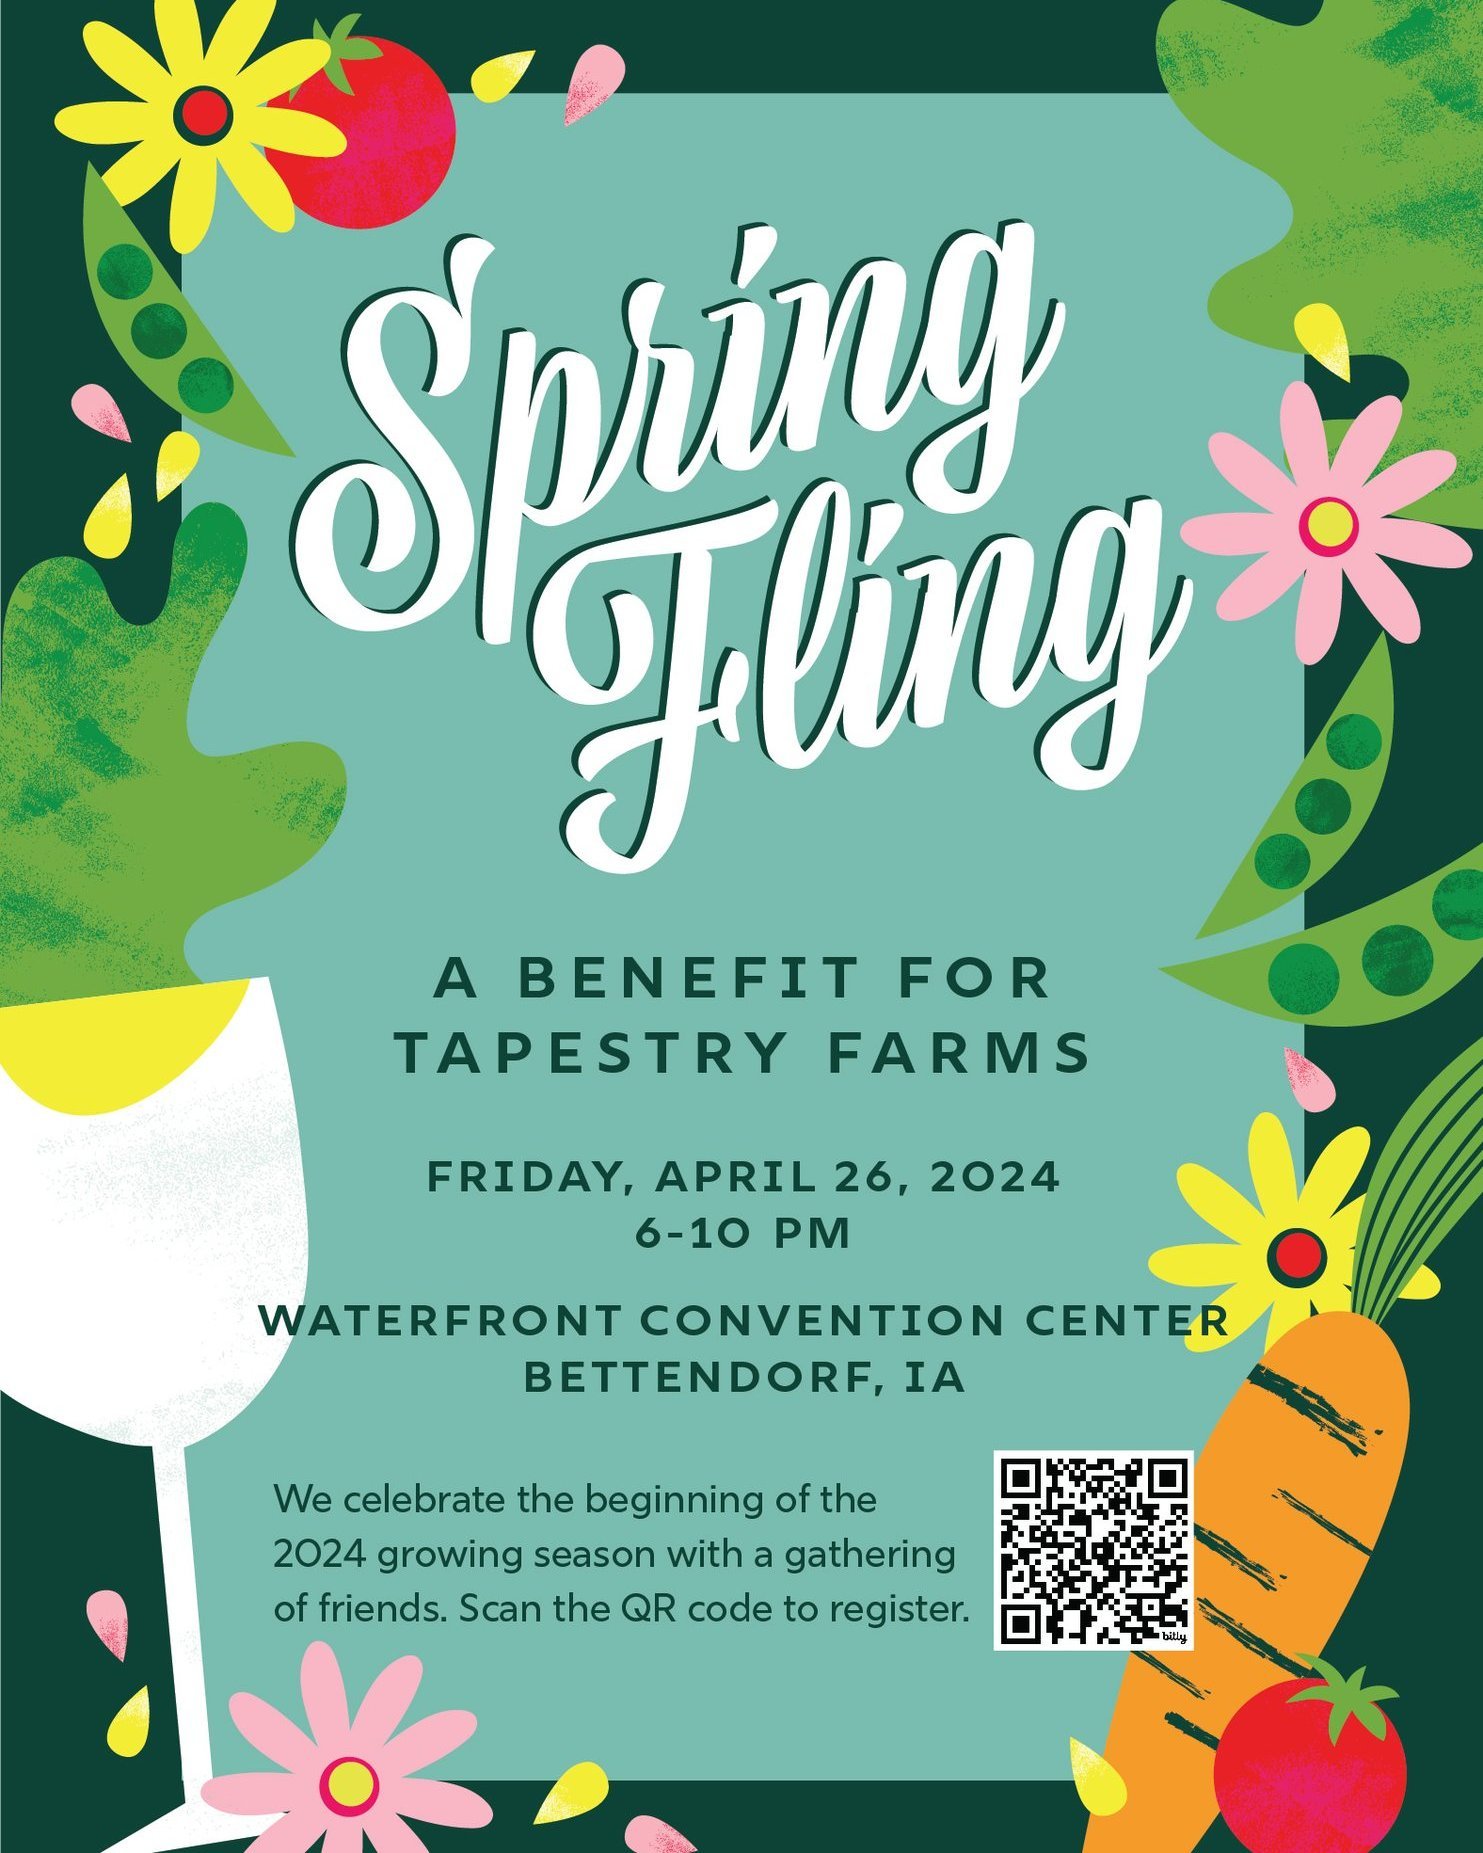 A week from tonight (4/26) we'll gather in a beautiful setting to hear inspiring stories, enjoy food, music, and the opportunity to give. The Tapestry Farms Spring Fling will be an evening of celebration and of looking forward to the future of welcom